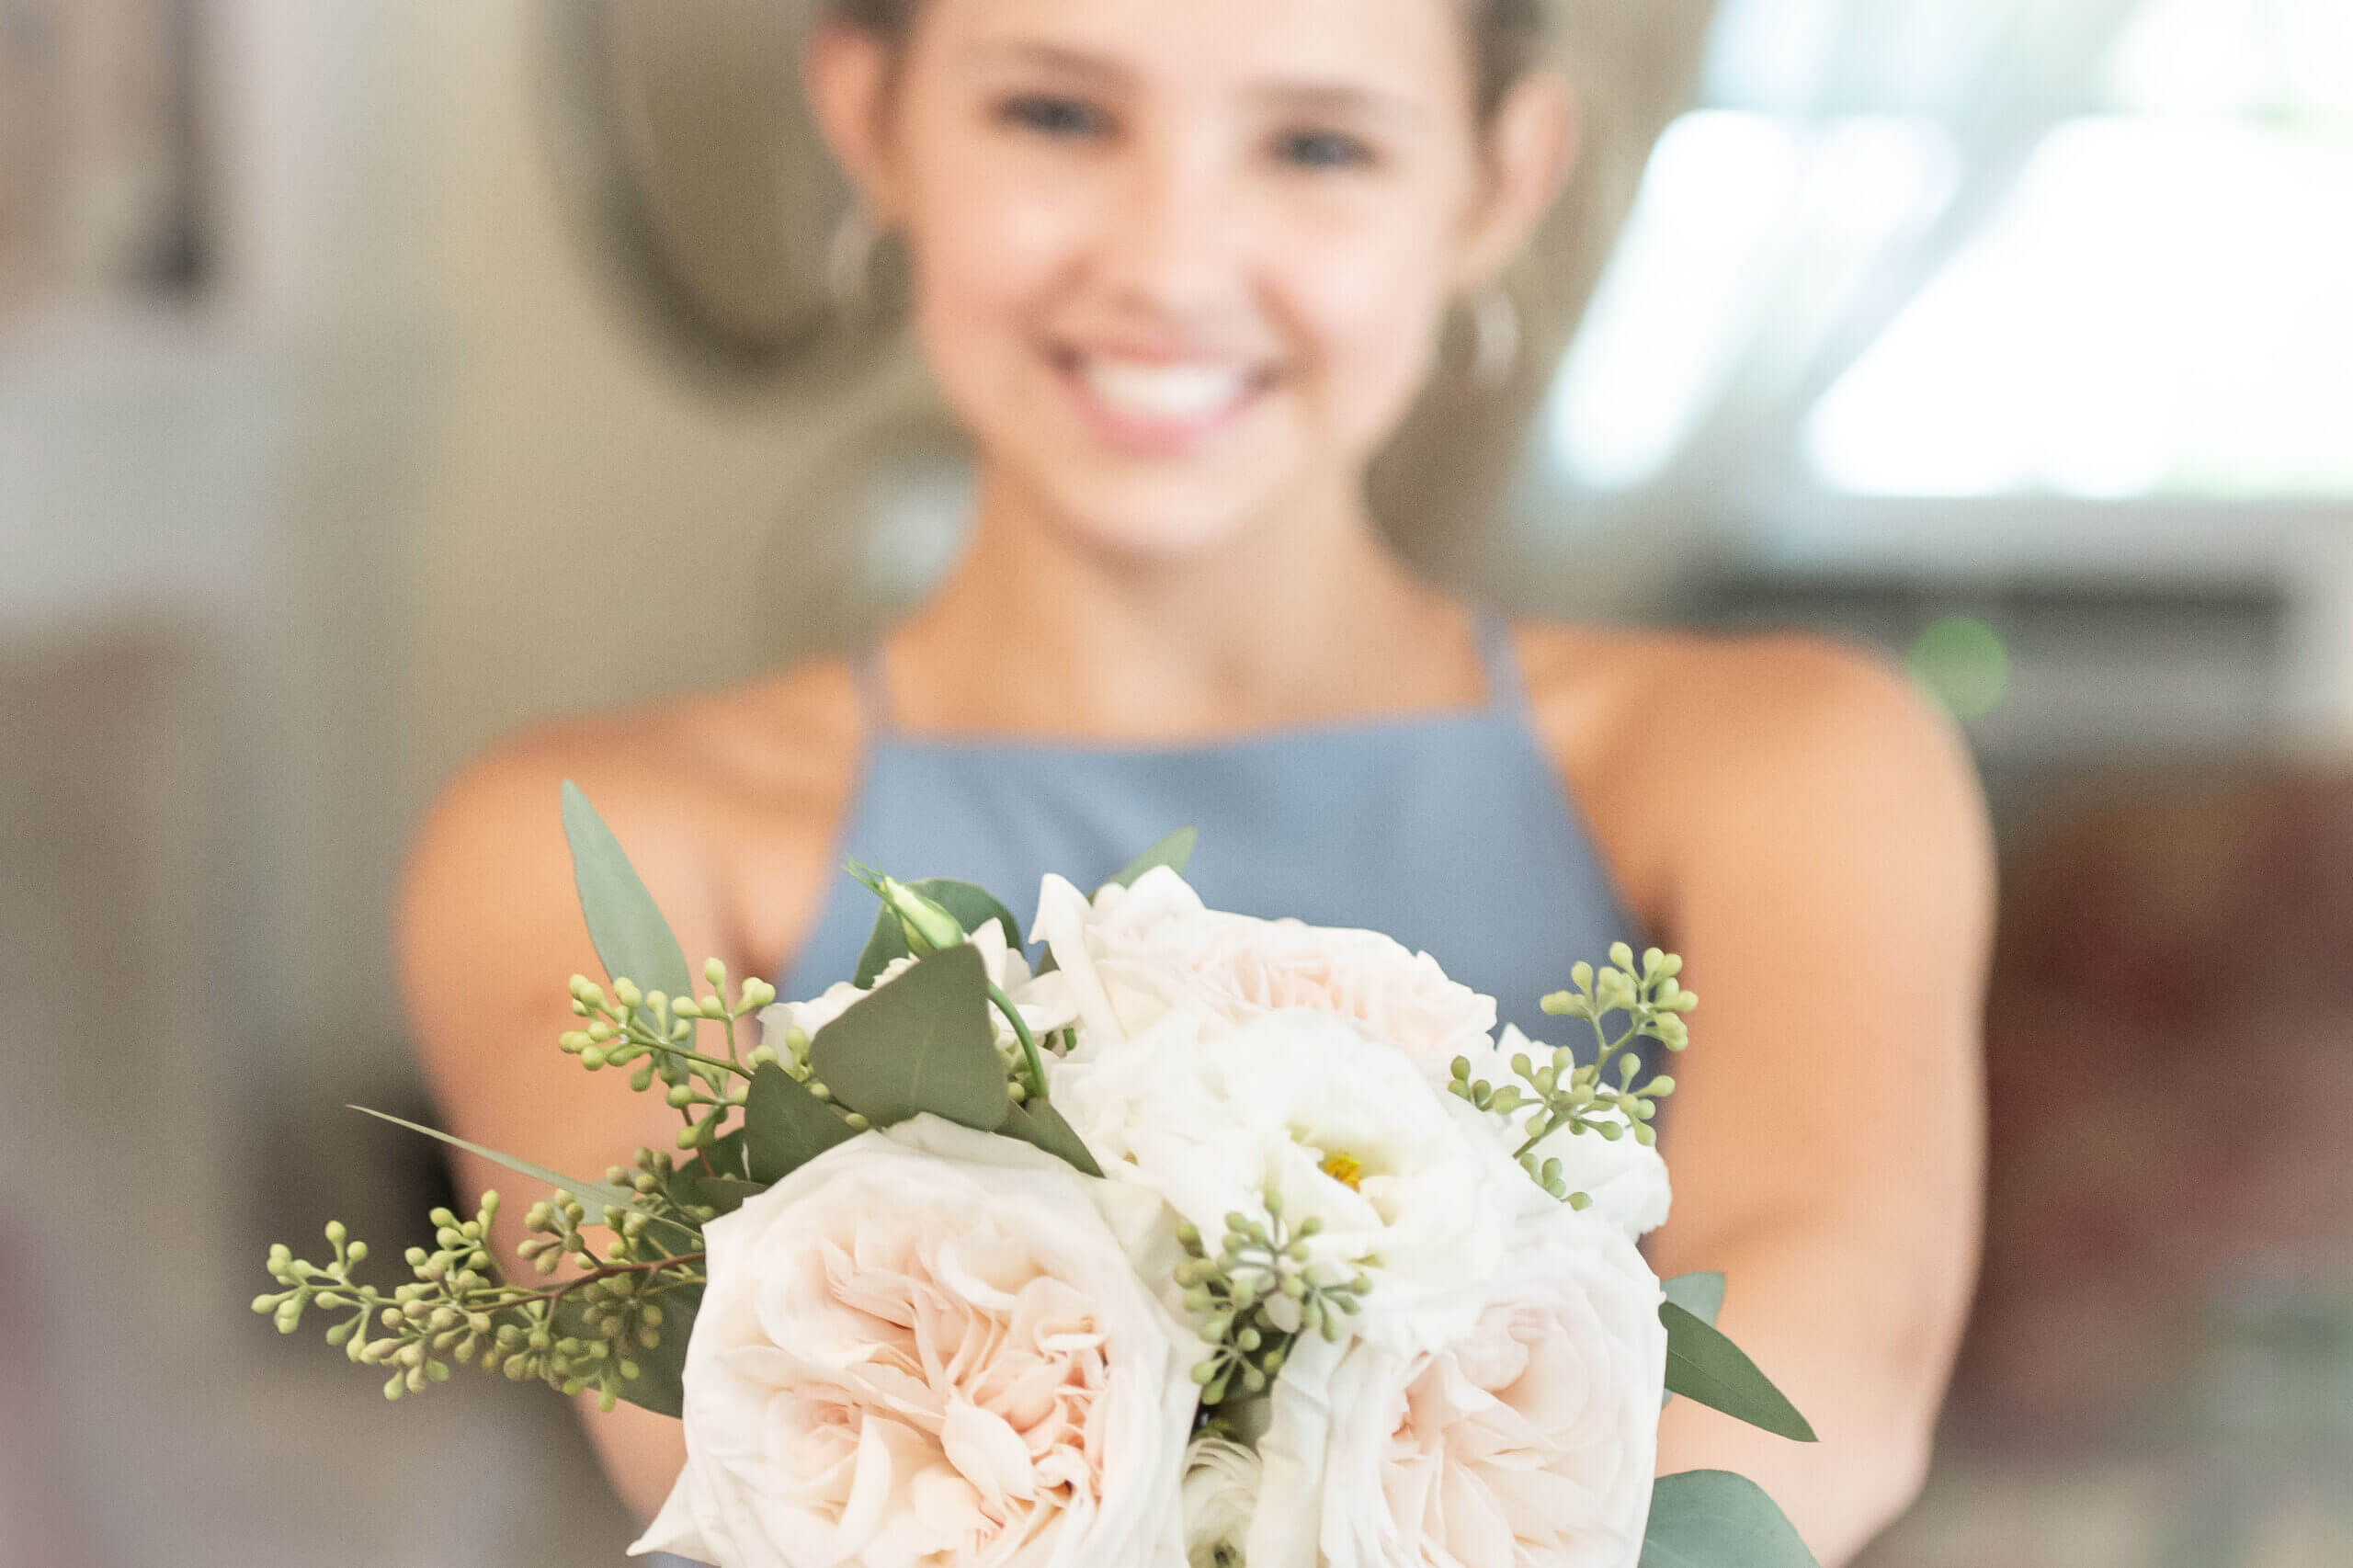 Female teenage girl out of focus holding a bouquet of flowers that are in focus, out in front of her.